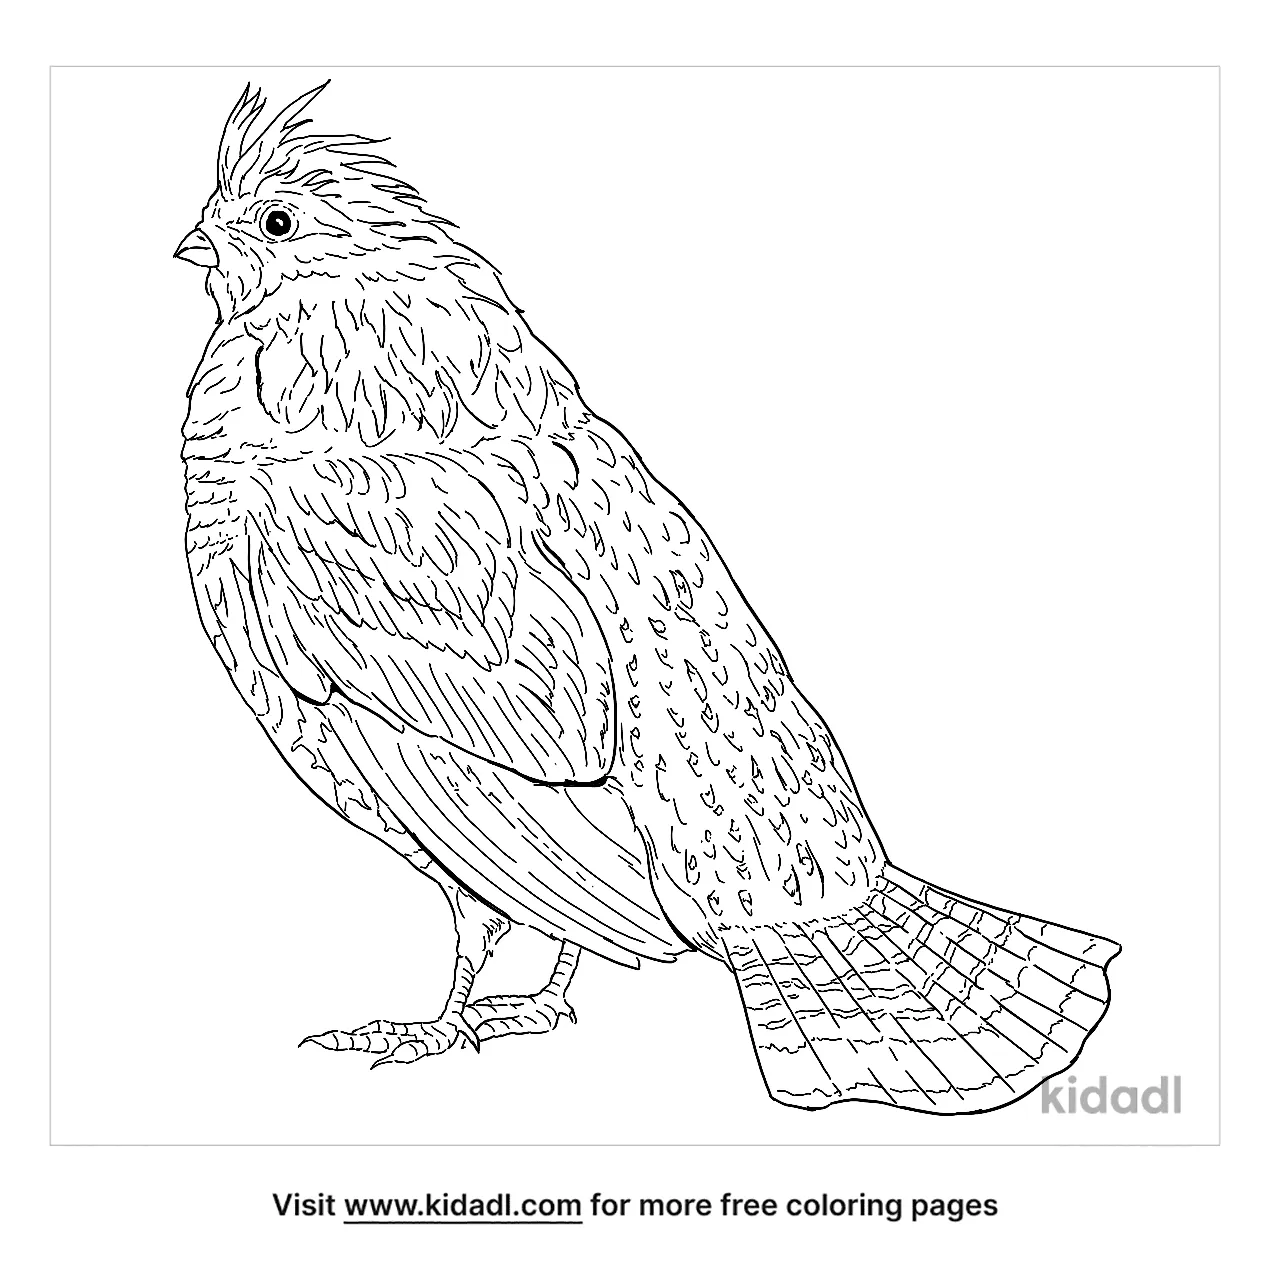 Grouse Coloring Page